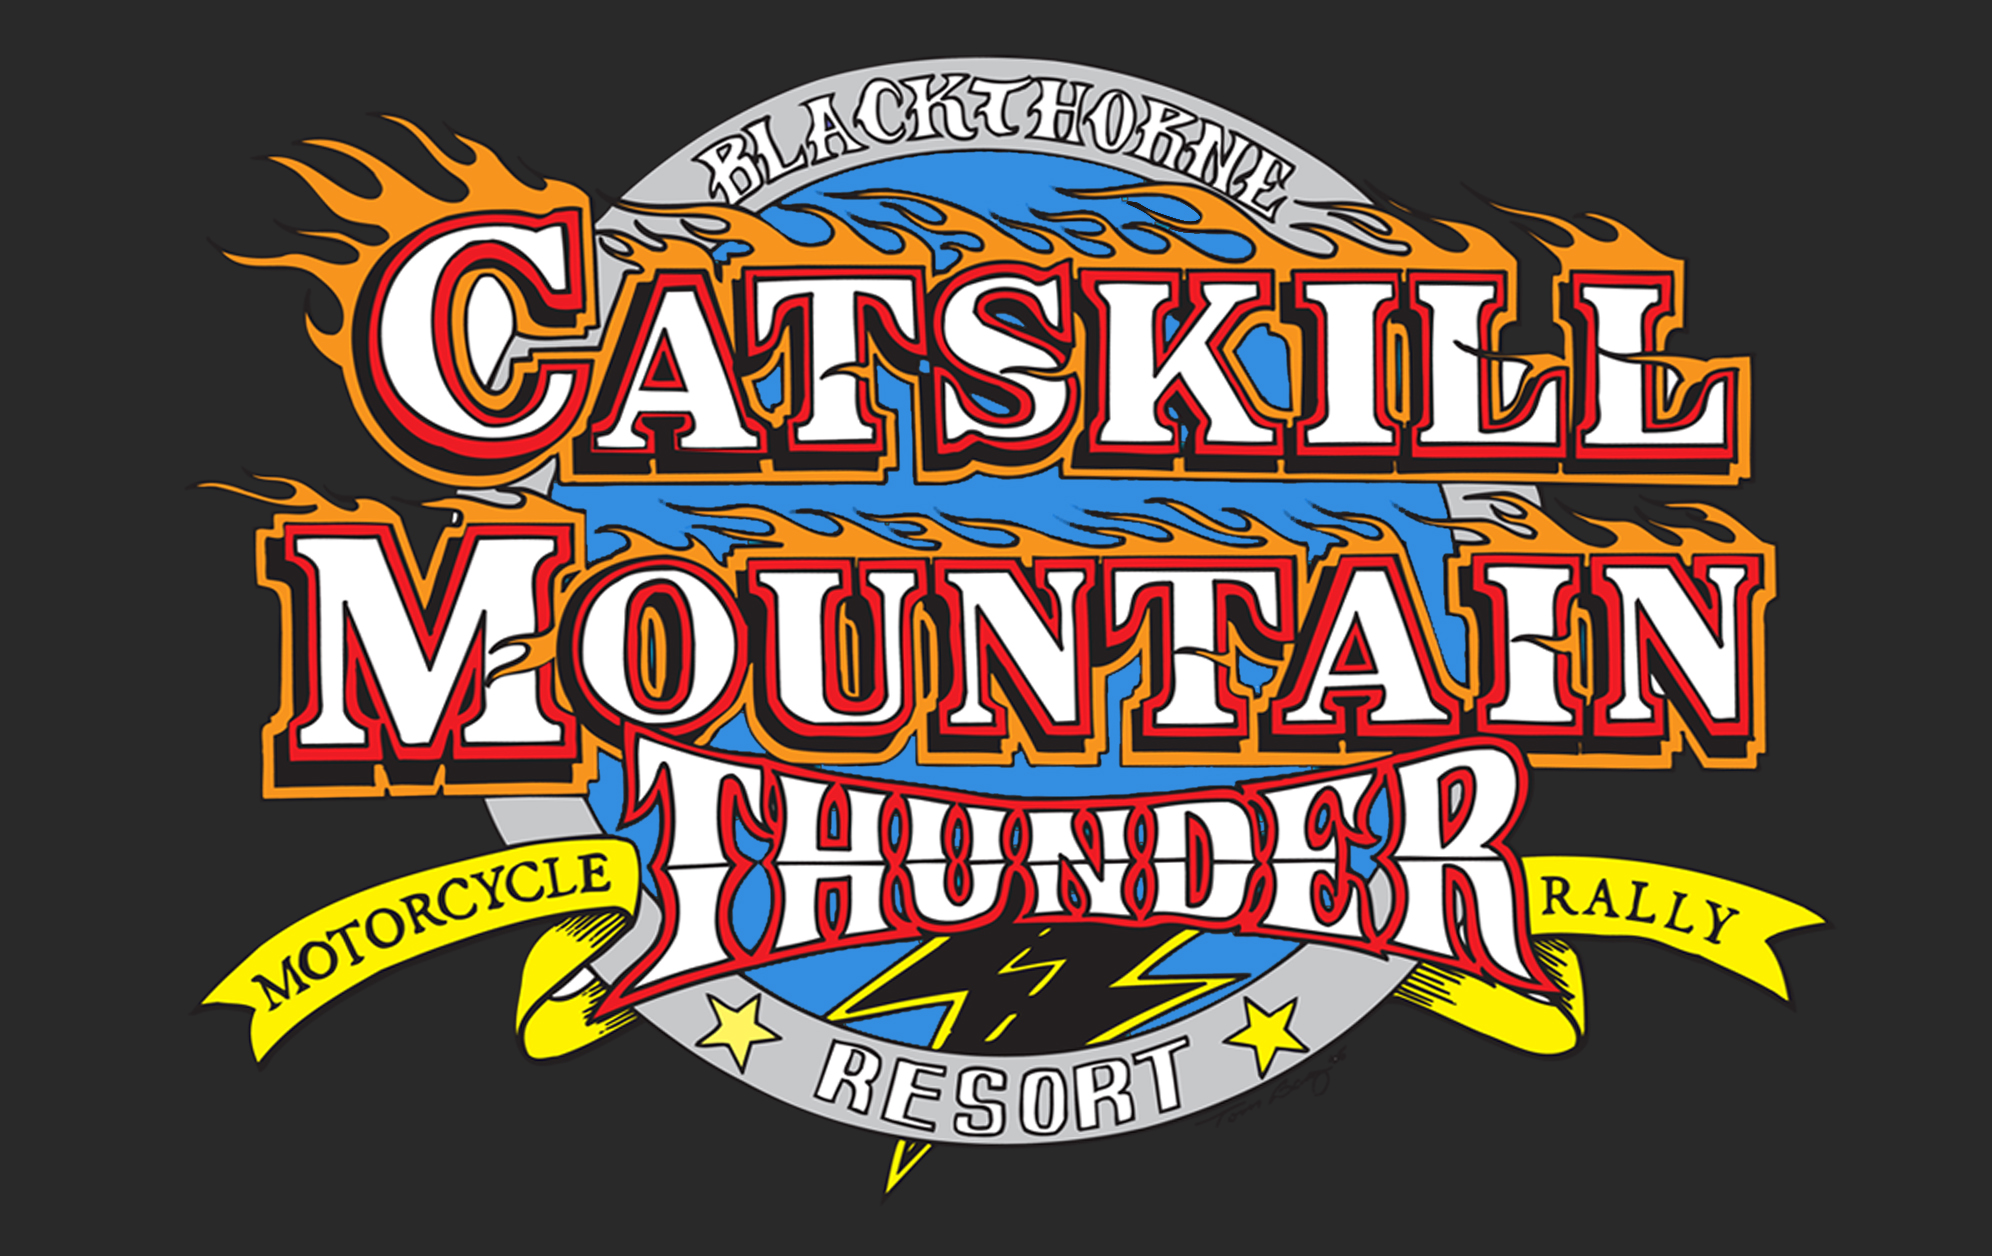 Catskill Mountain Thunder Motorcycle festival! - Motorcycle Event in New York, USA ...